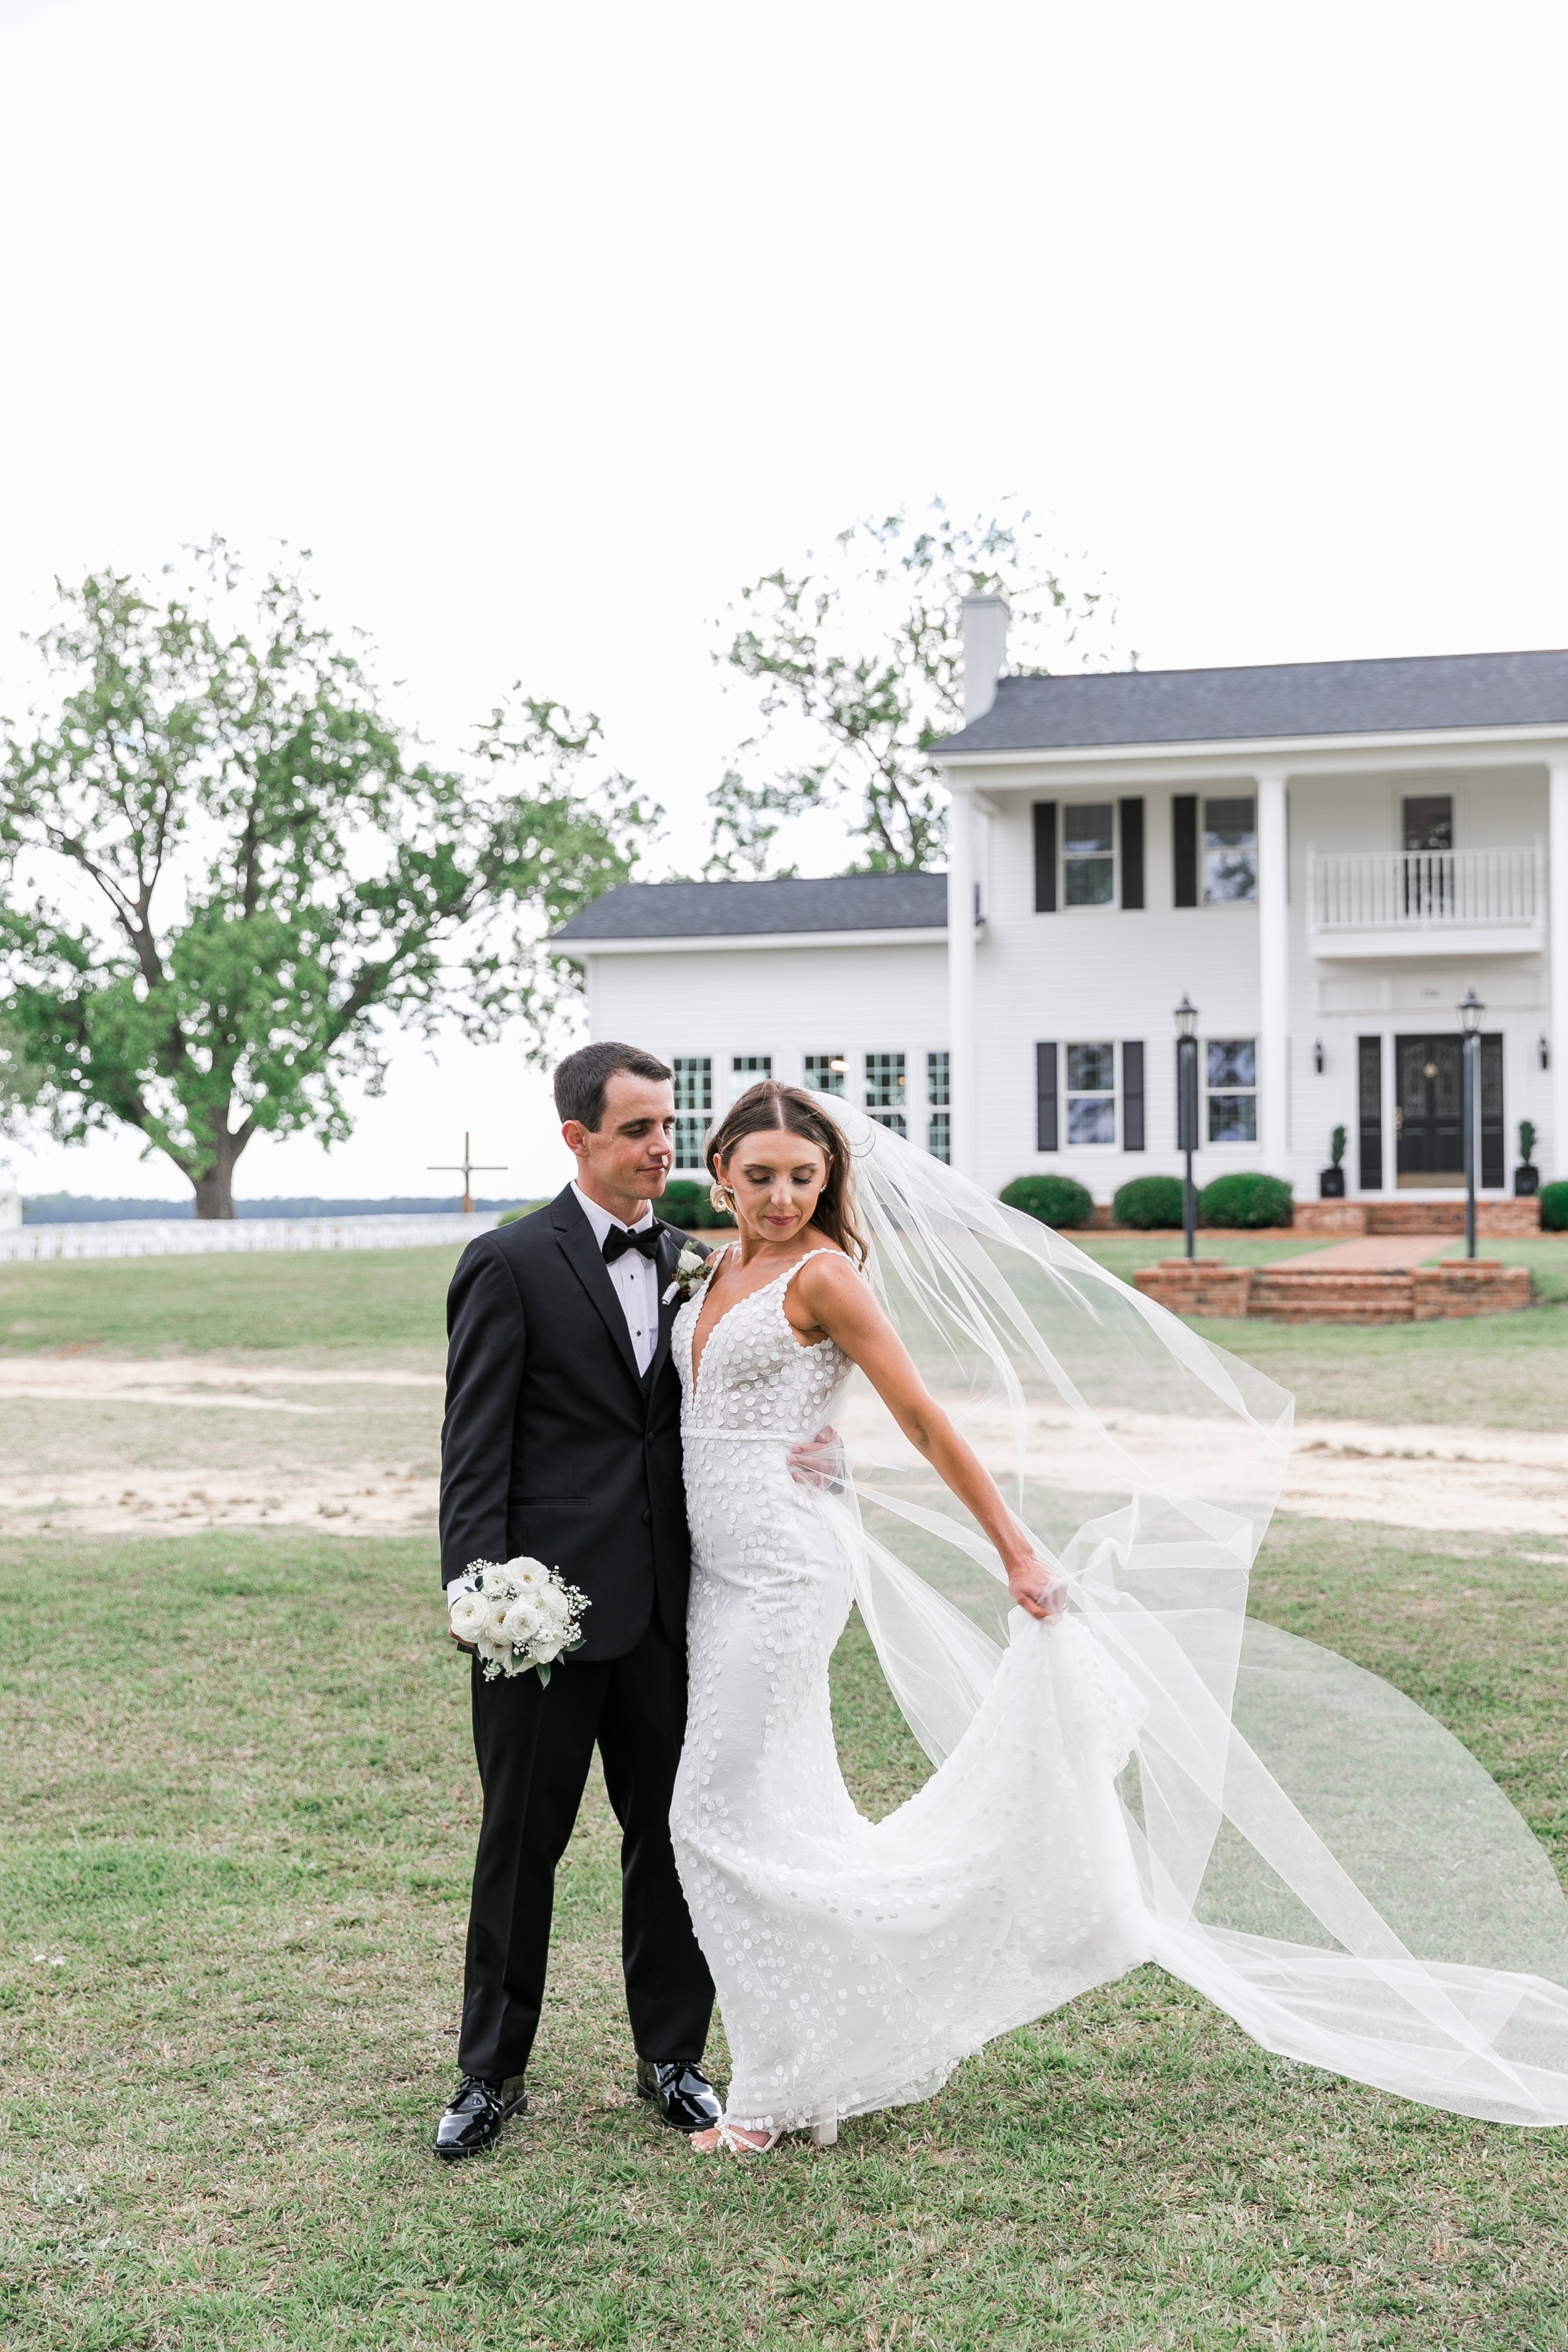 ivory-and-beau-bride-tristan-in-louis-fitted-by-made-with-love-a-sexy-fitted-modern-strappy-wedding-gown-with-a-v-neck-and-unique-floral-lace-available-from-savannah-bridal-shop-ivory-and-beau-10.jpg